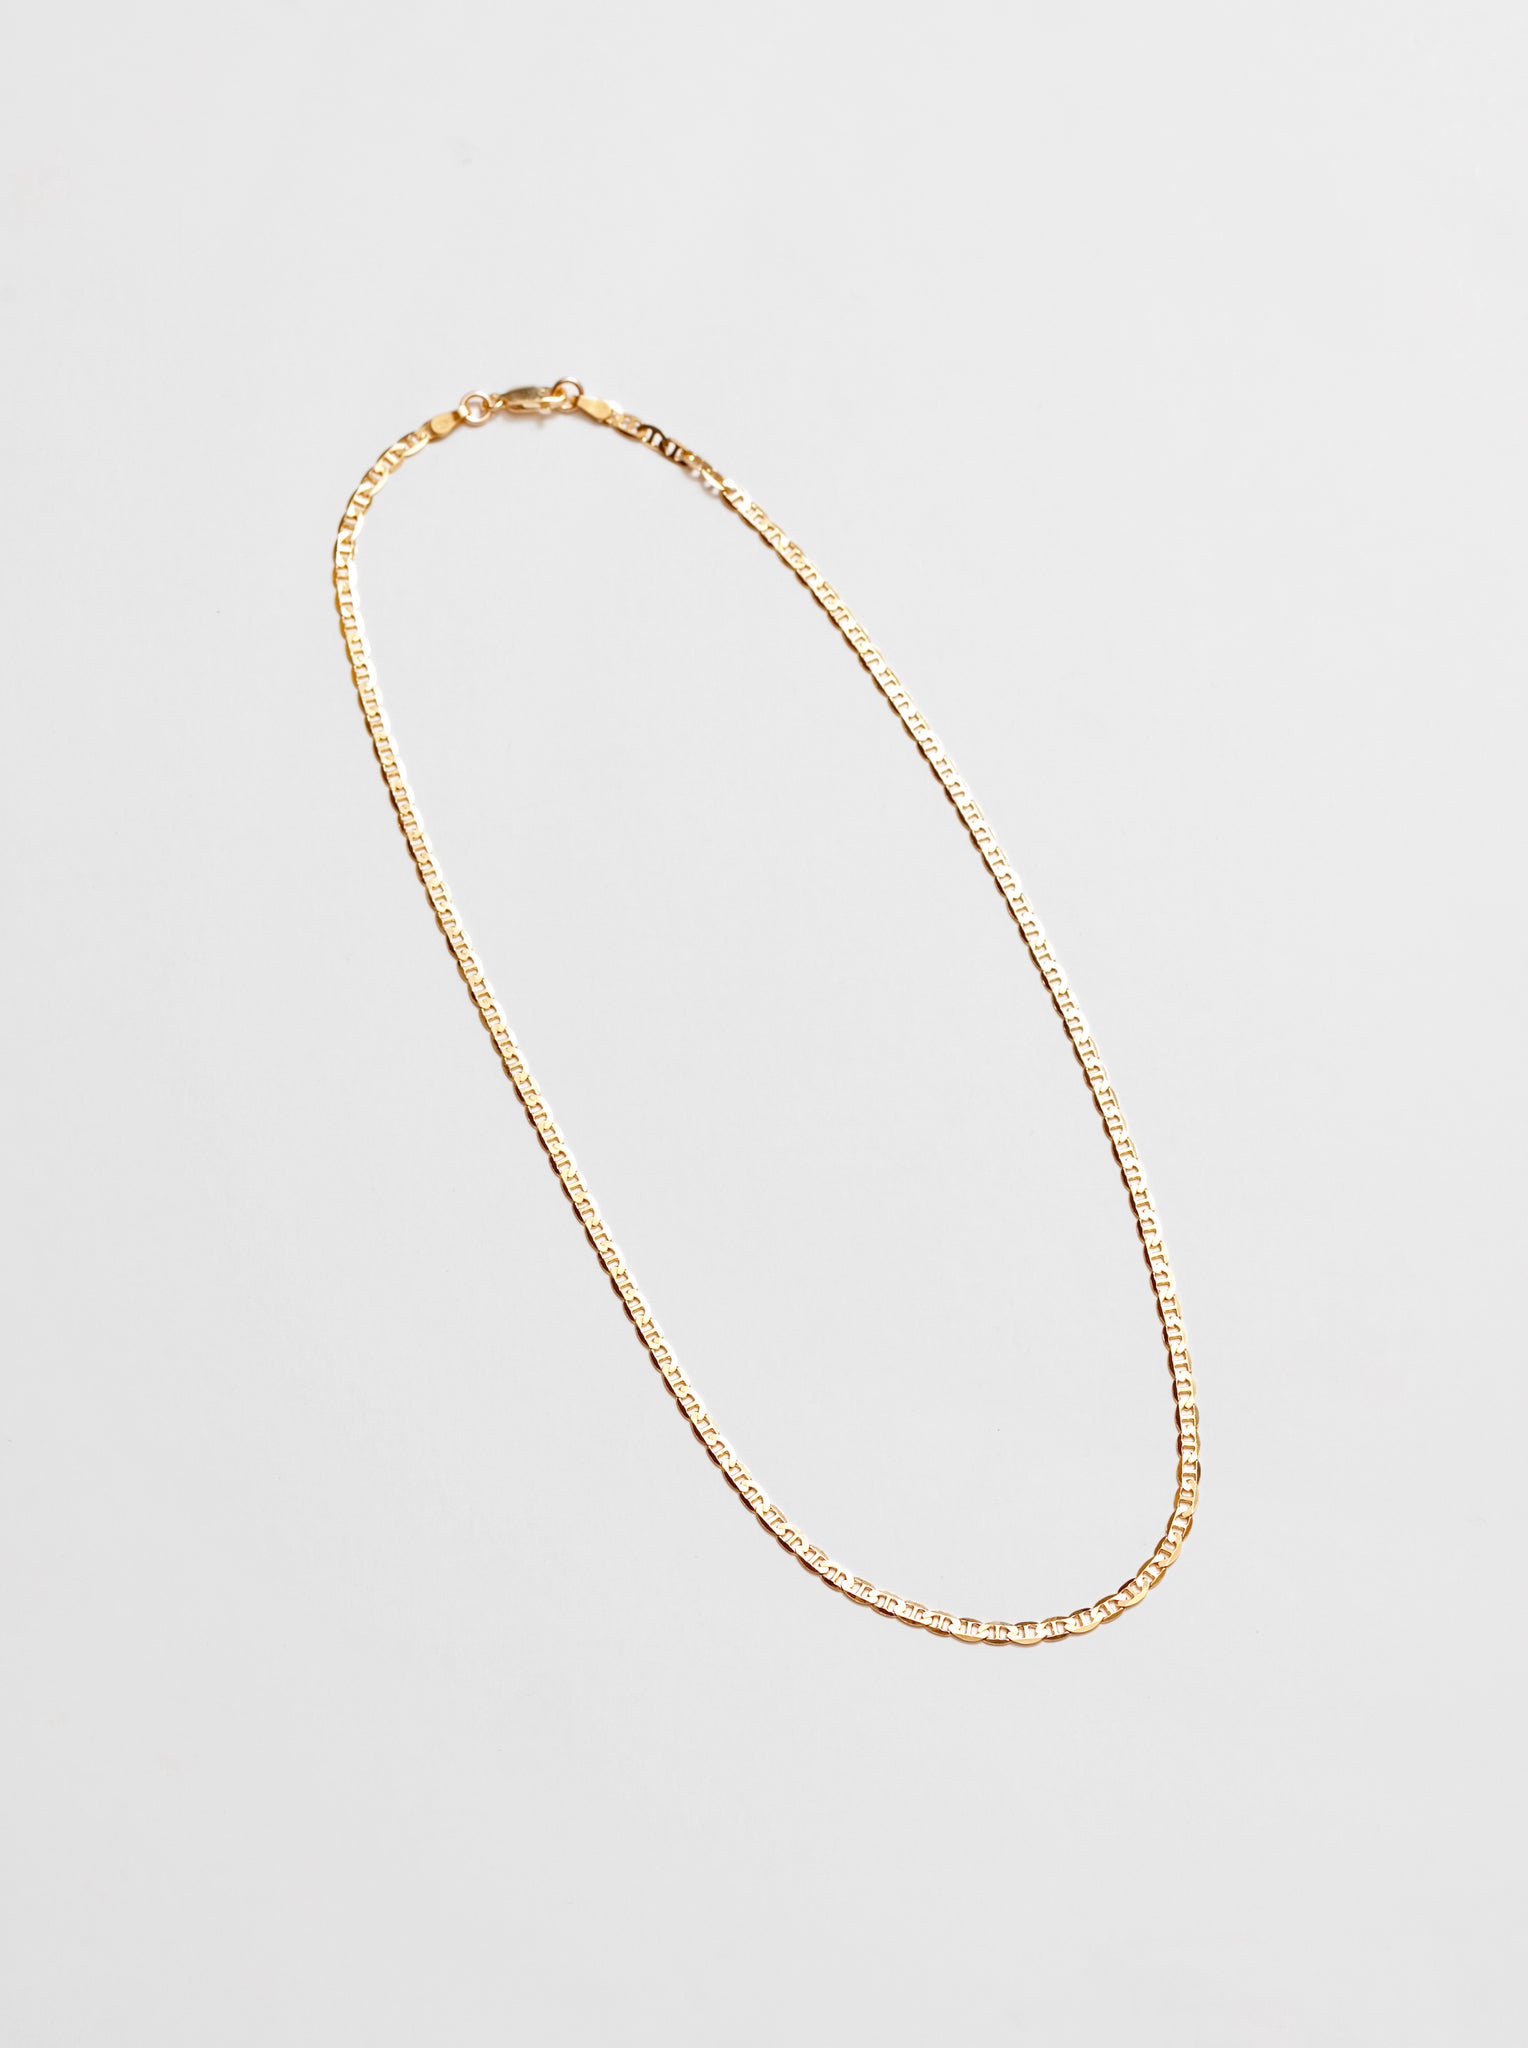 Wolf Circus 14k Gold Vermeil Mariner Chain Necklace | Handcrafted | Toni Necklace in Gold-Necklaces-wolfcircus.com